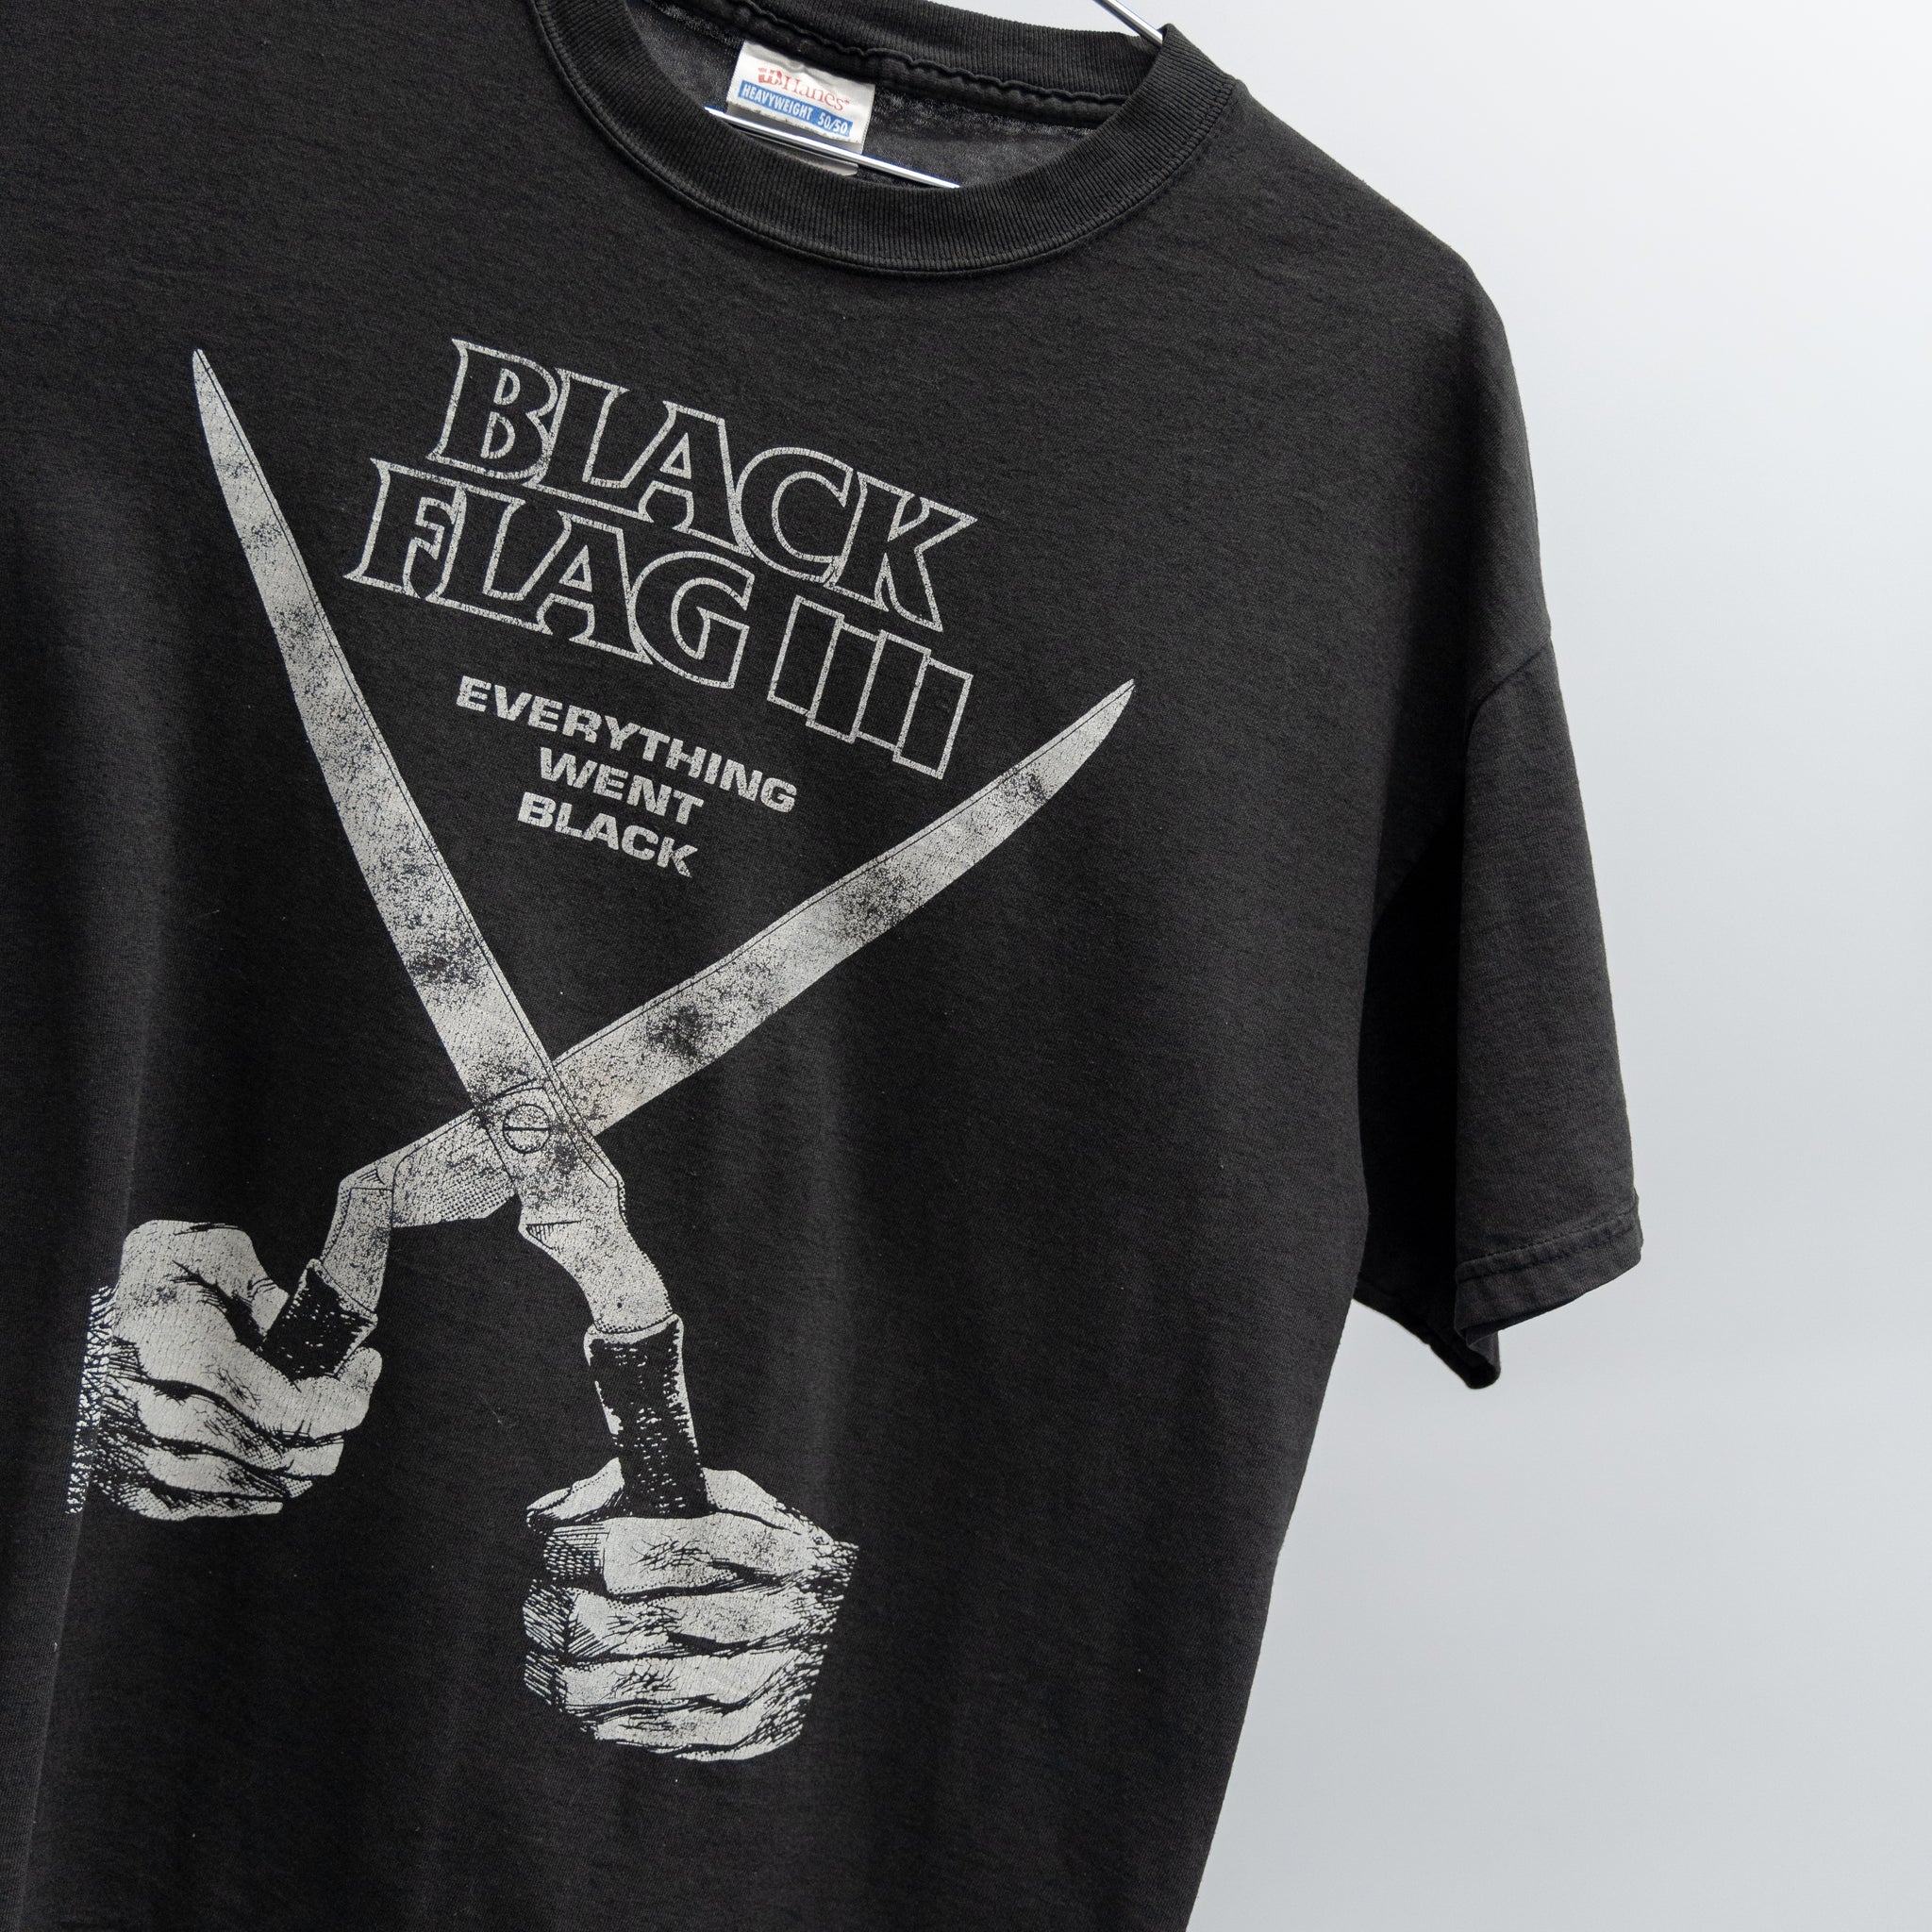 BLACK FLAG 'EVERYTHING WENT BLACK' TEE - 1990/EARLY 2000'S